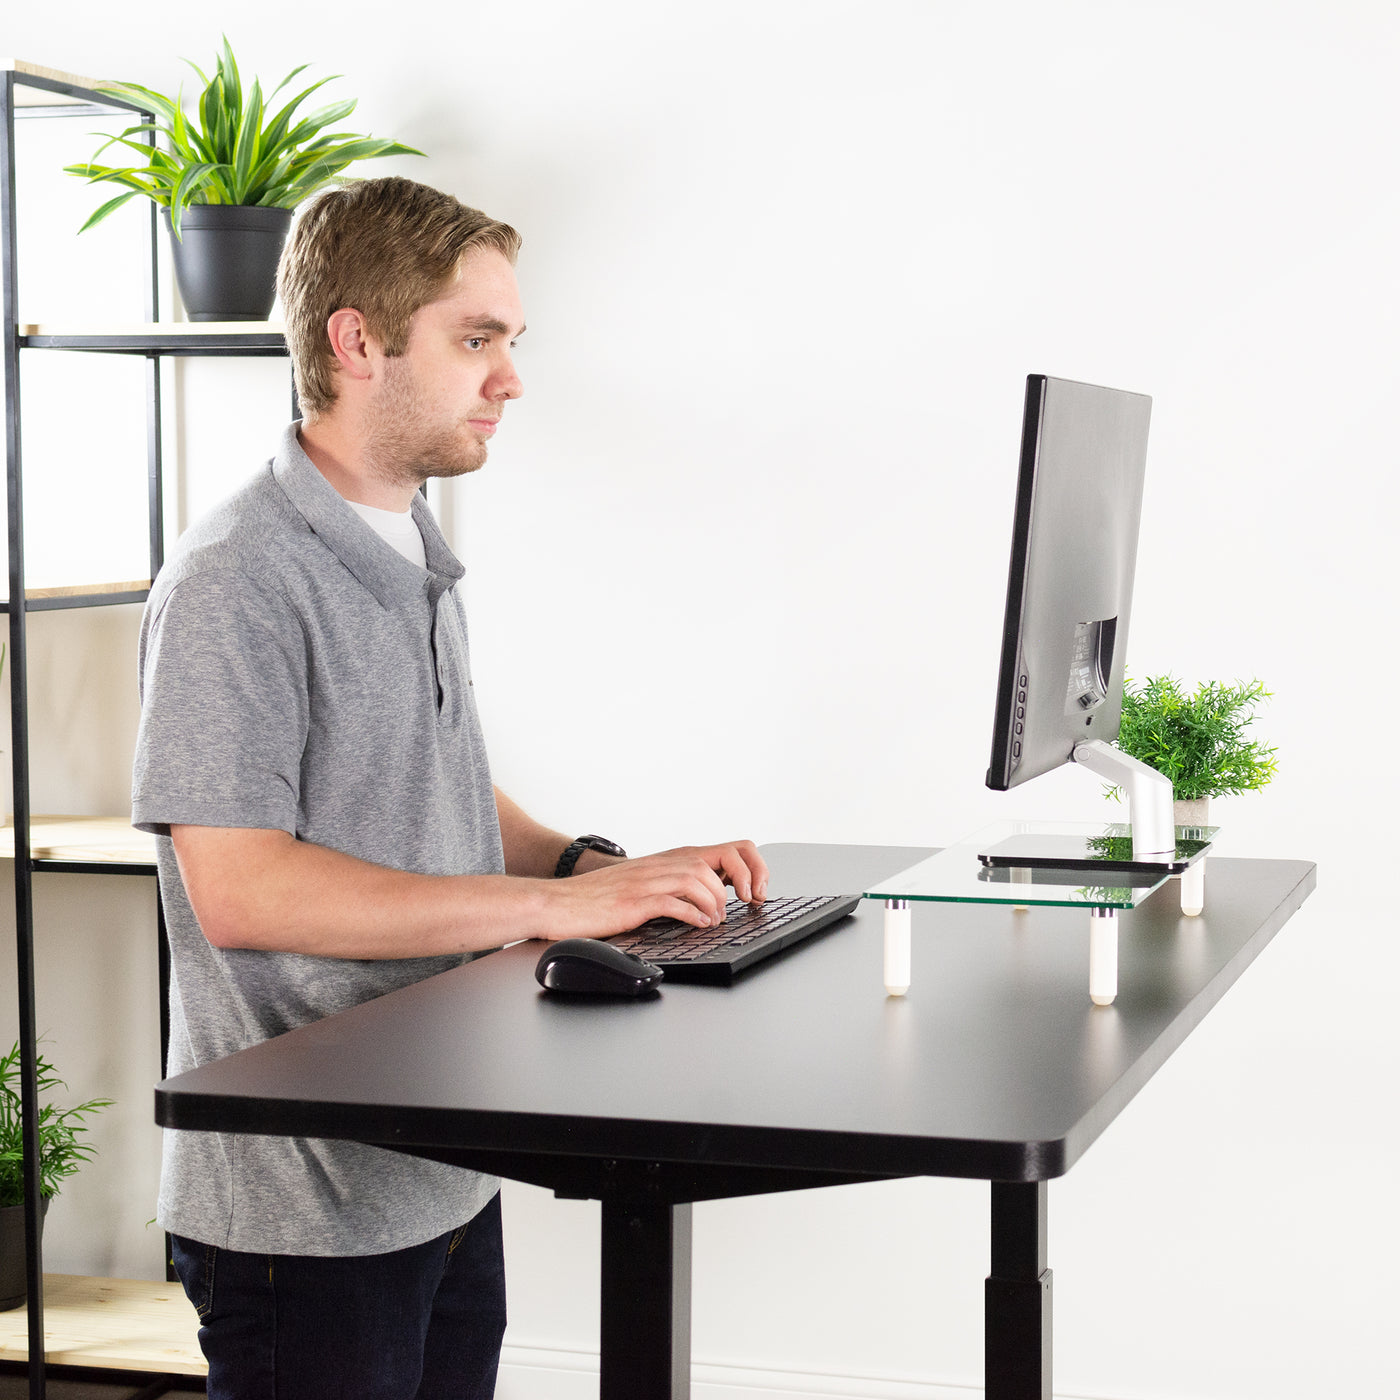 Ergonomic office with black table top.